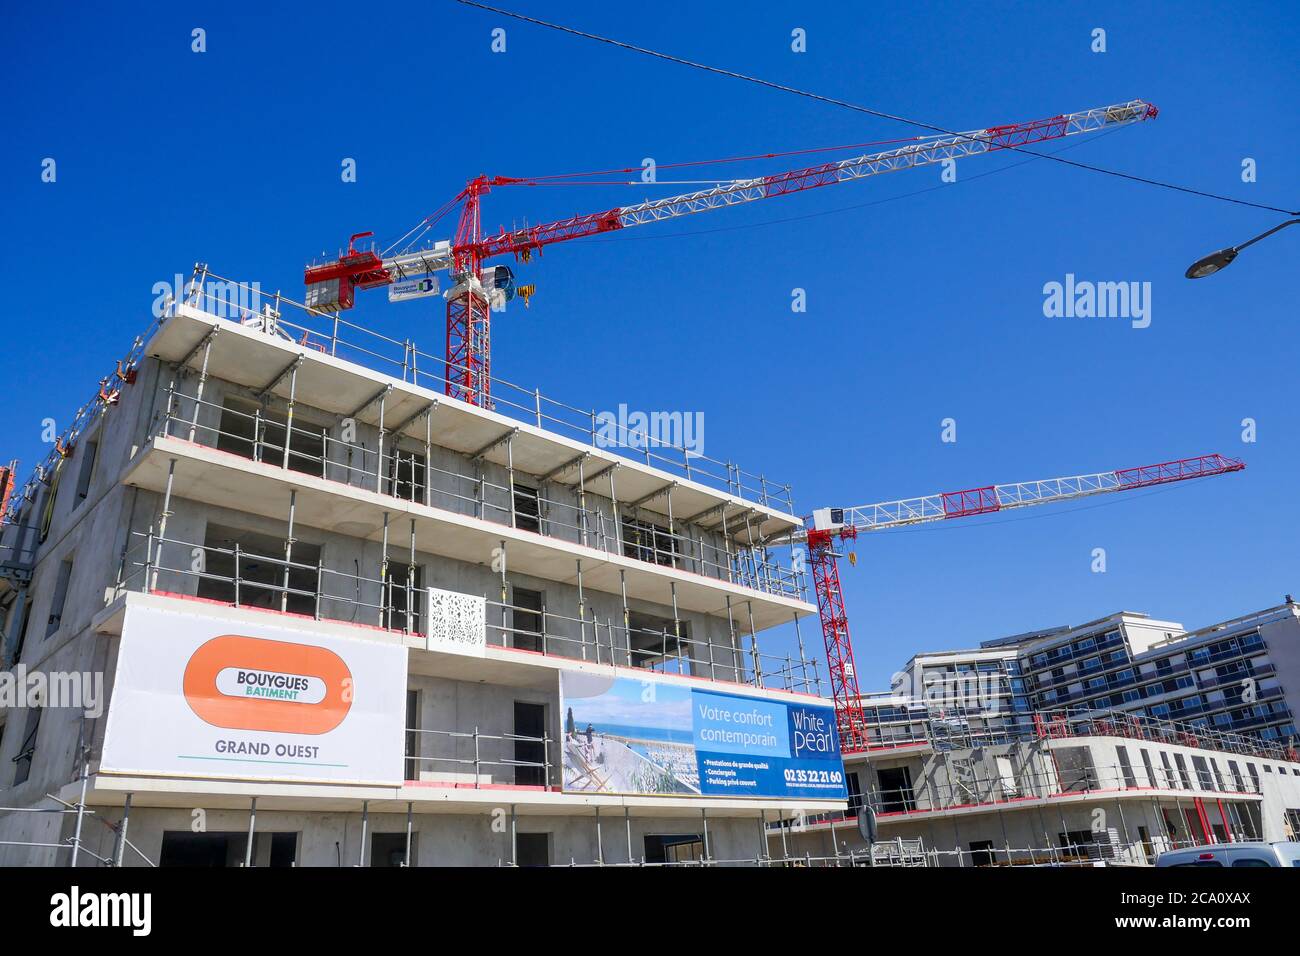 Ongoing works on a Bouygues company building construction site, Le Havre, Seine-Maritime, Normandy, France Stock Photo